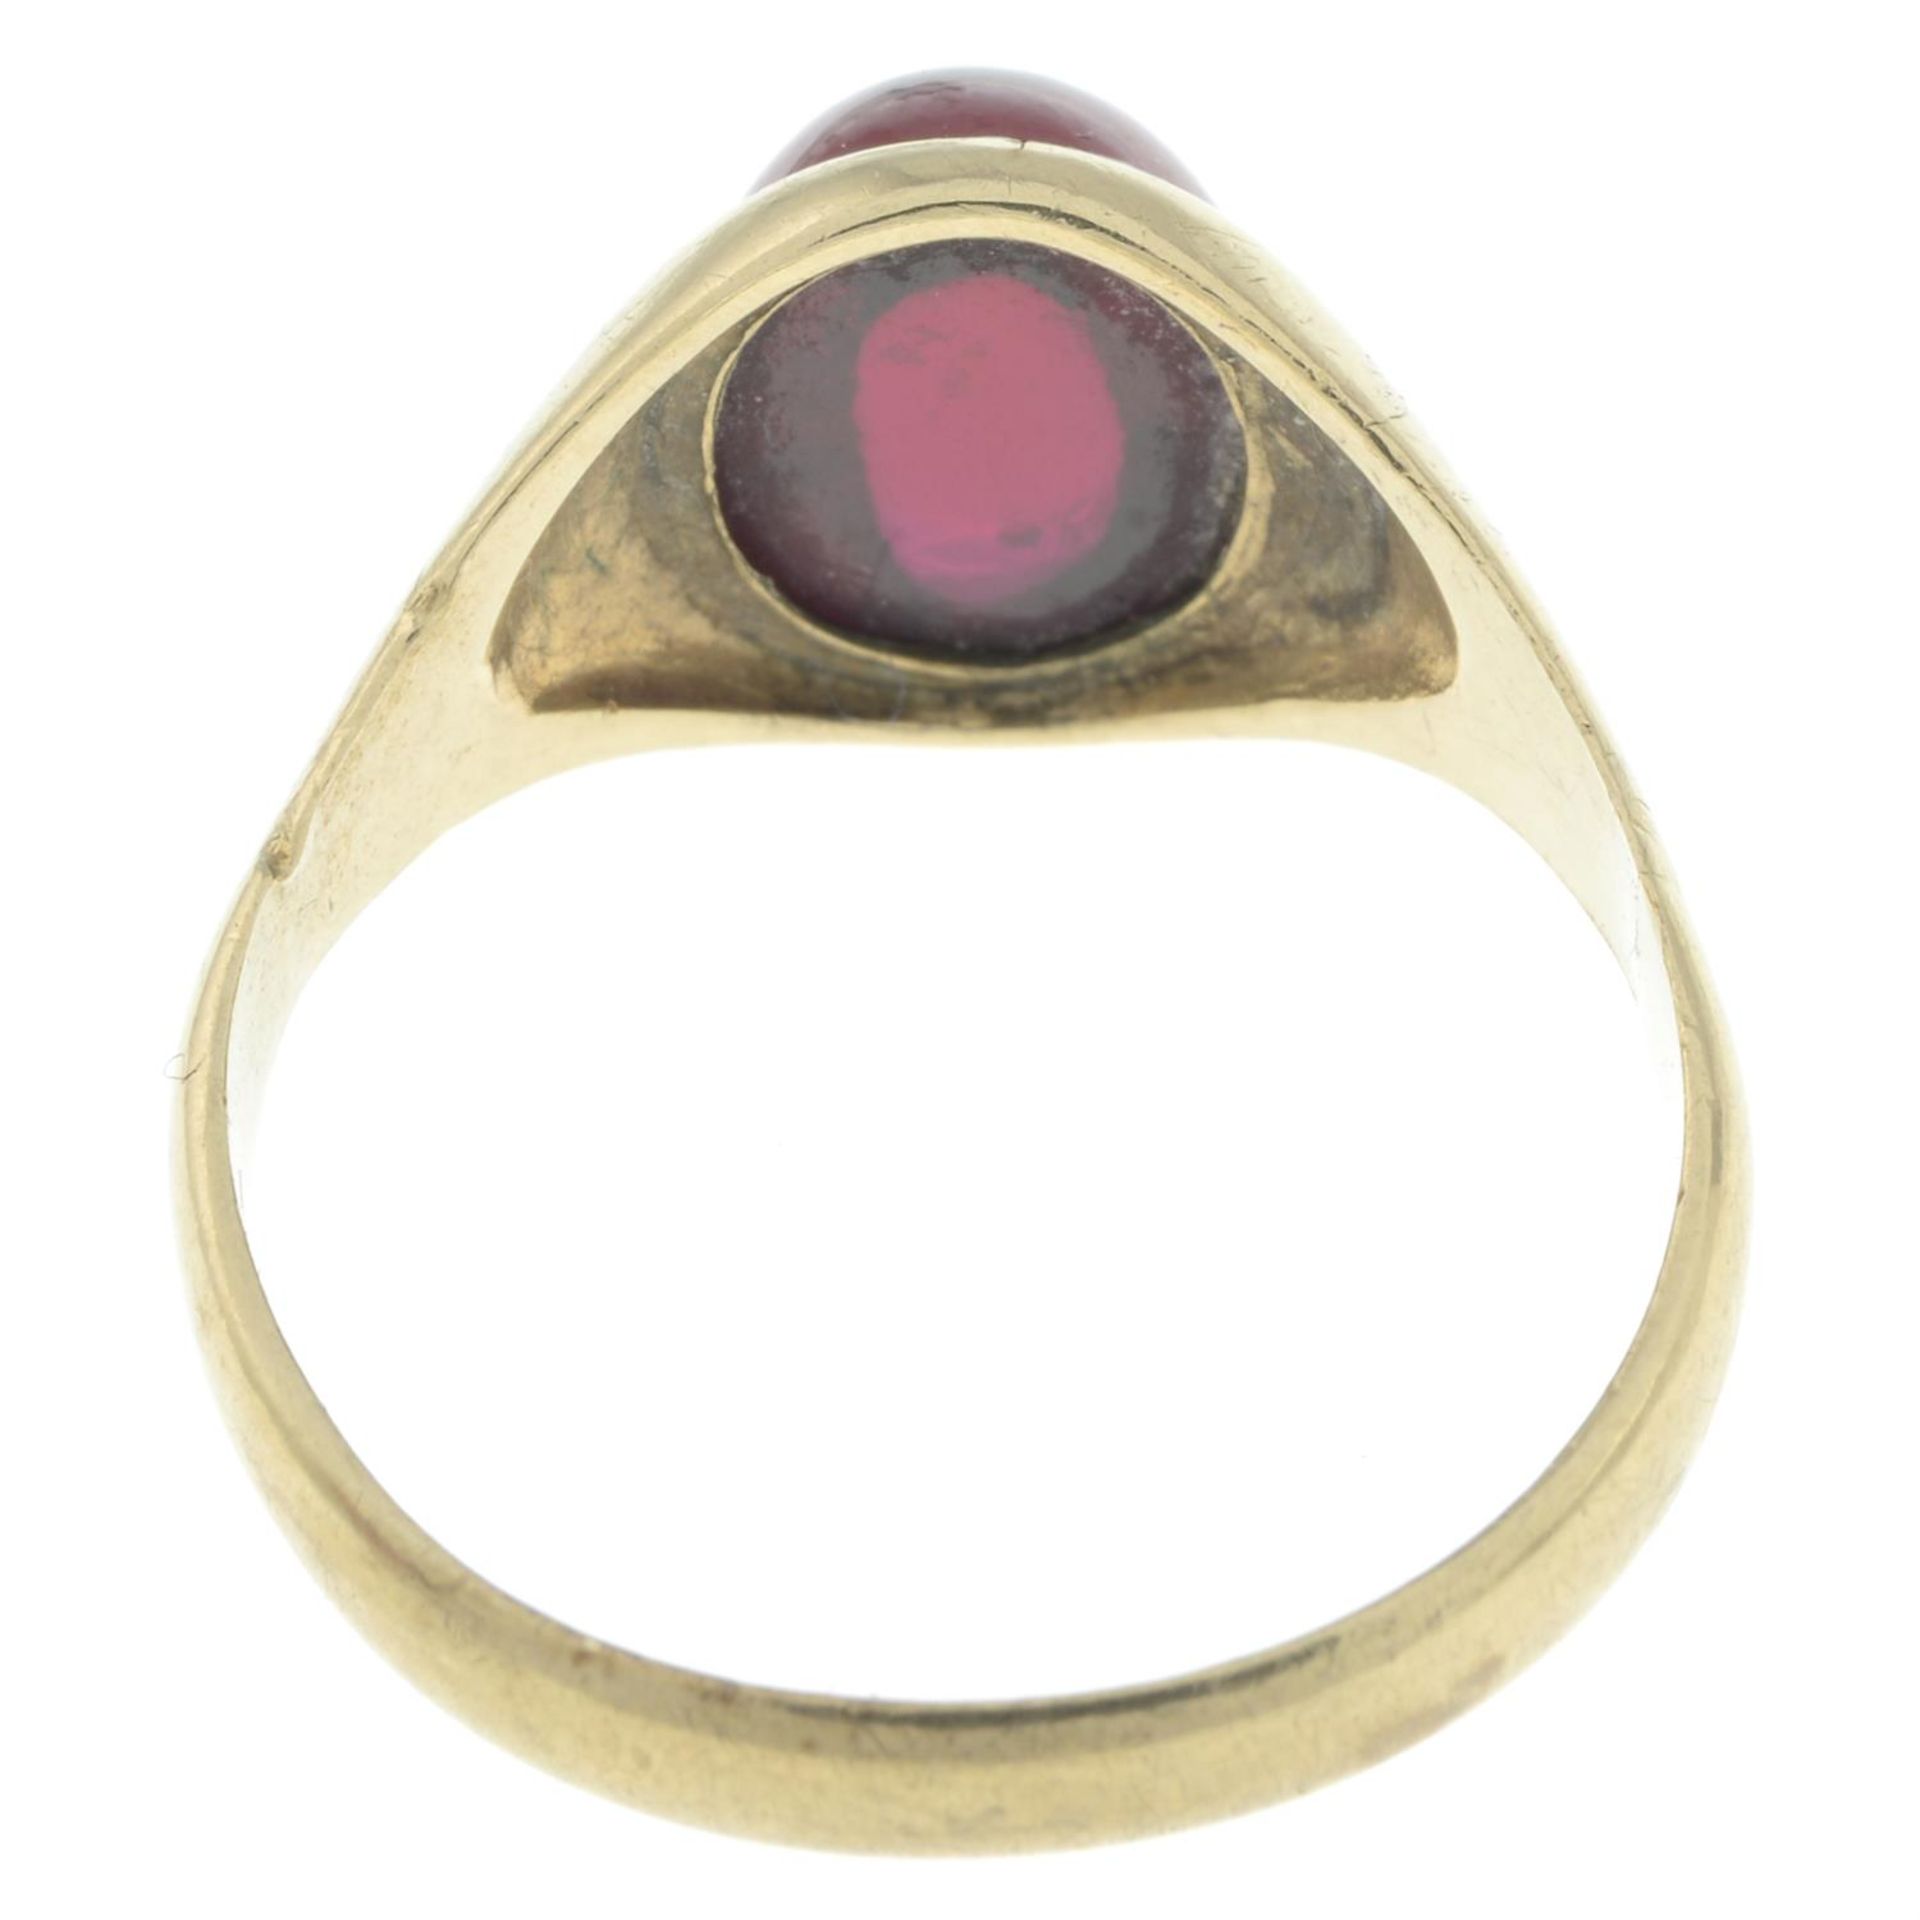 Mid 20th century synthetic ruby signet ring - Image 2 of 2